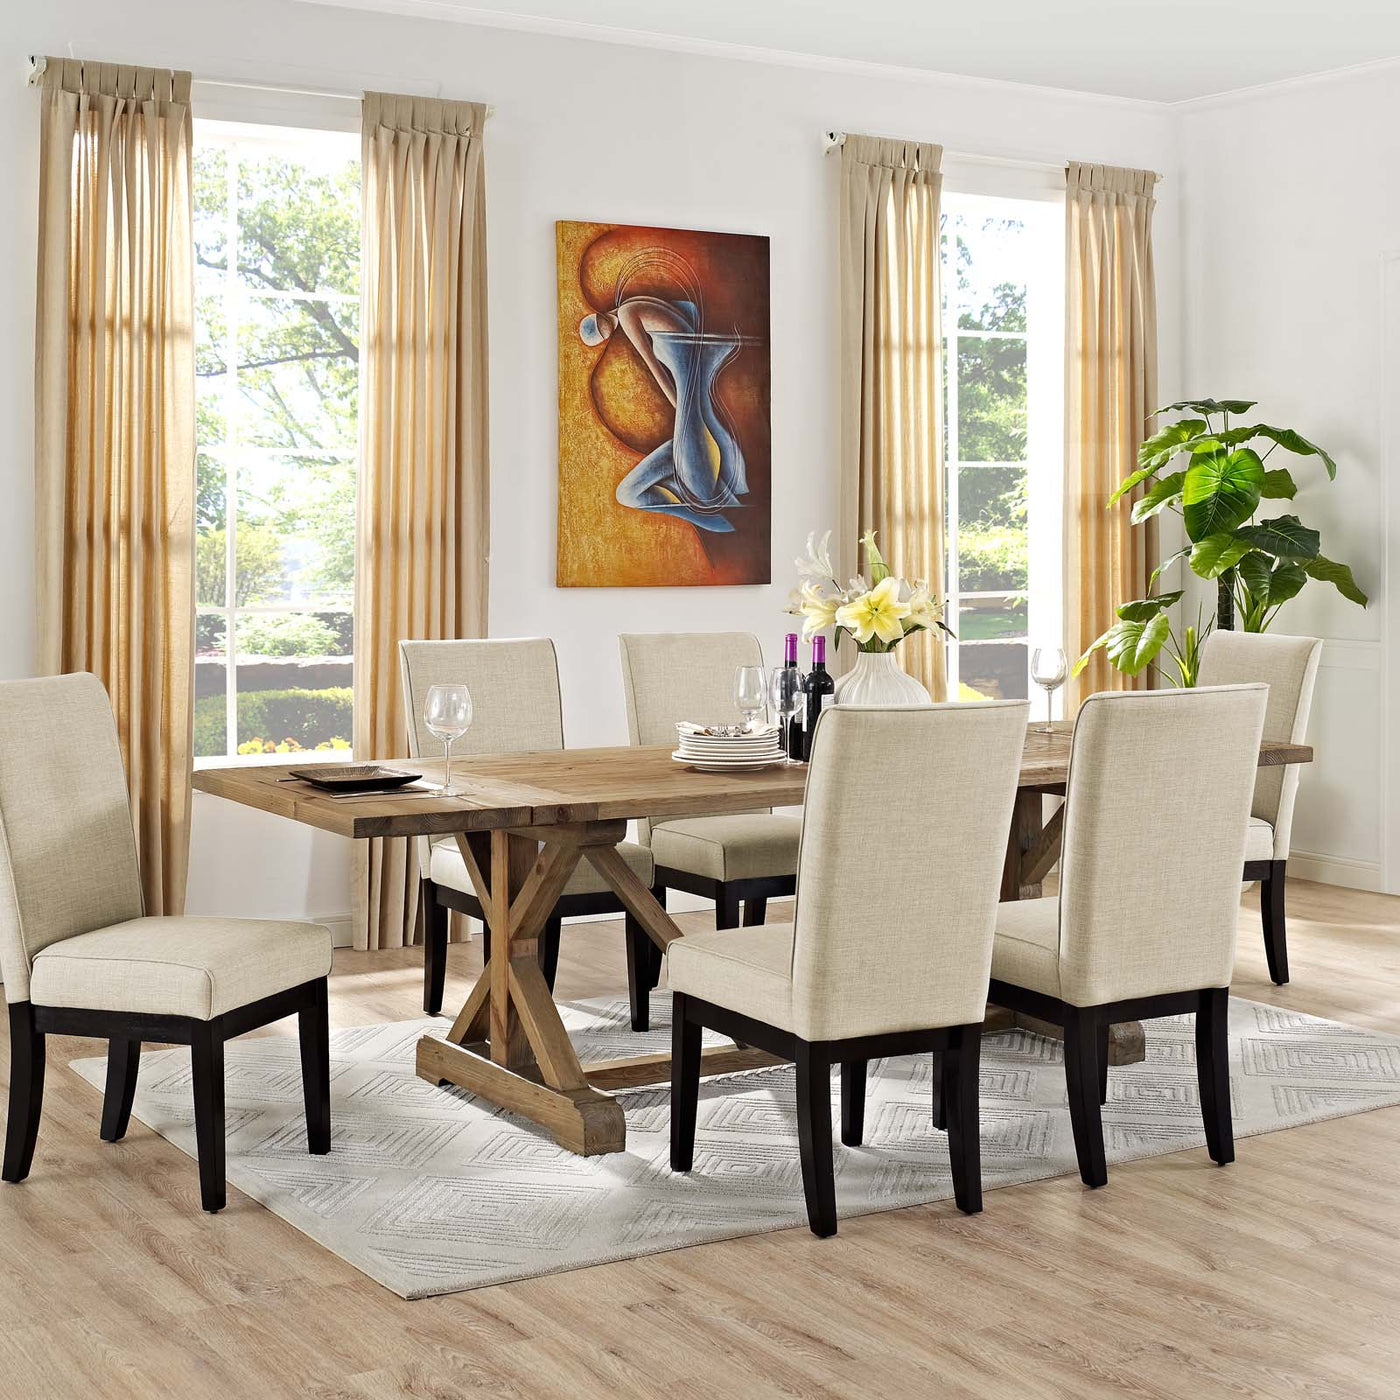 Den Extendable Wood Dining Table